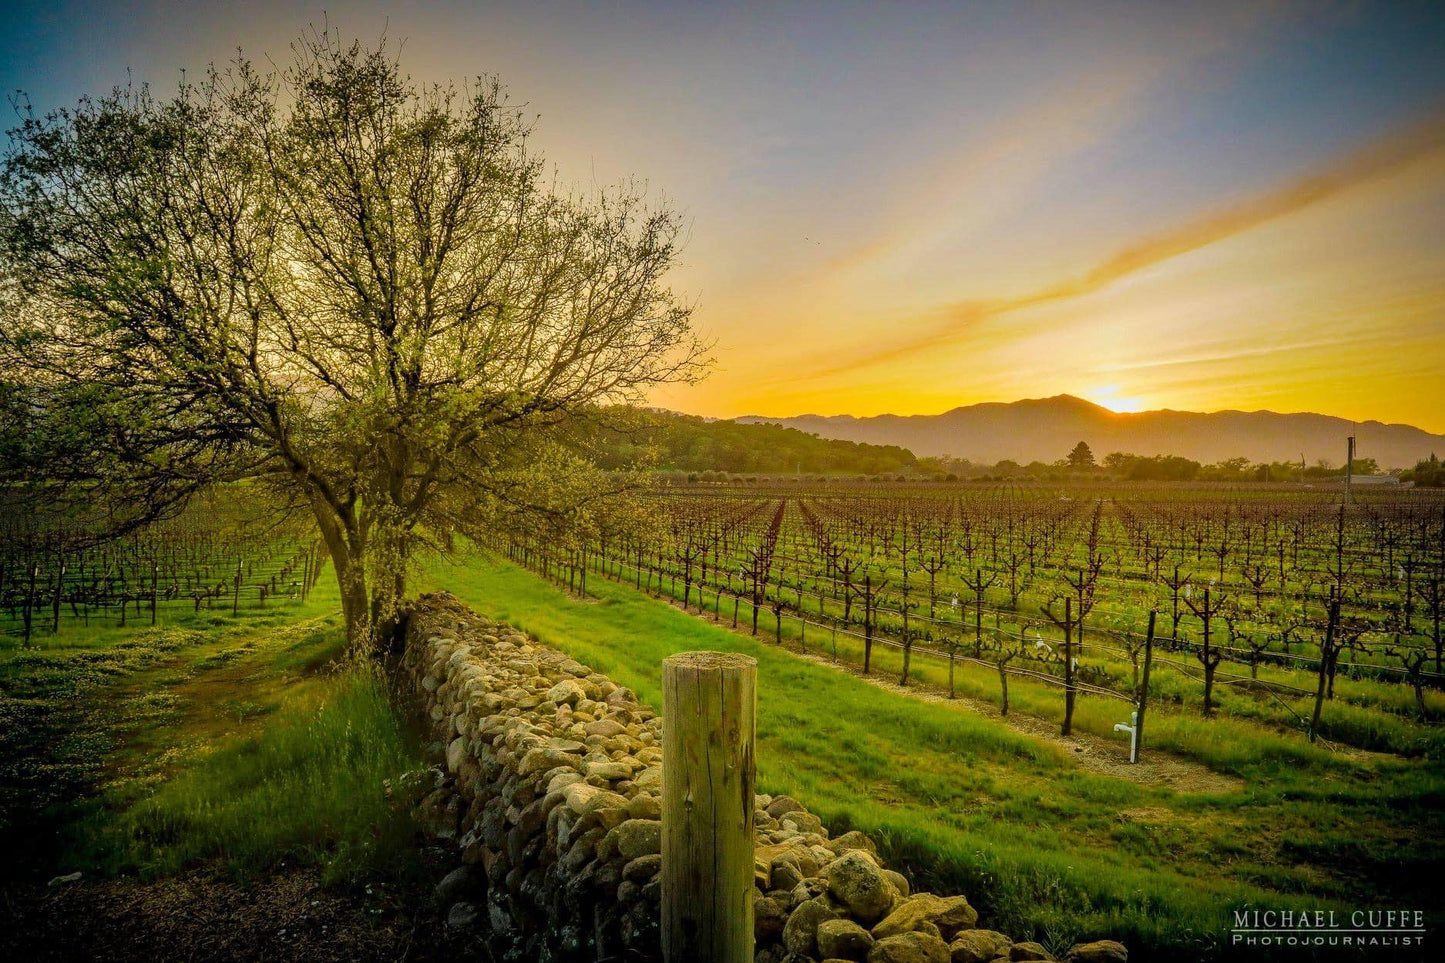 Spring in the Napa Valley